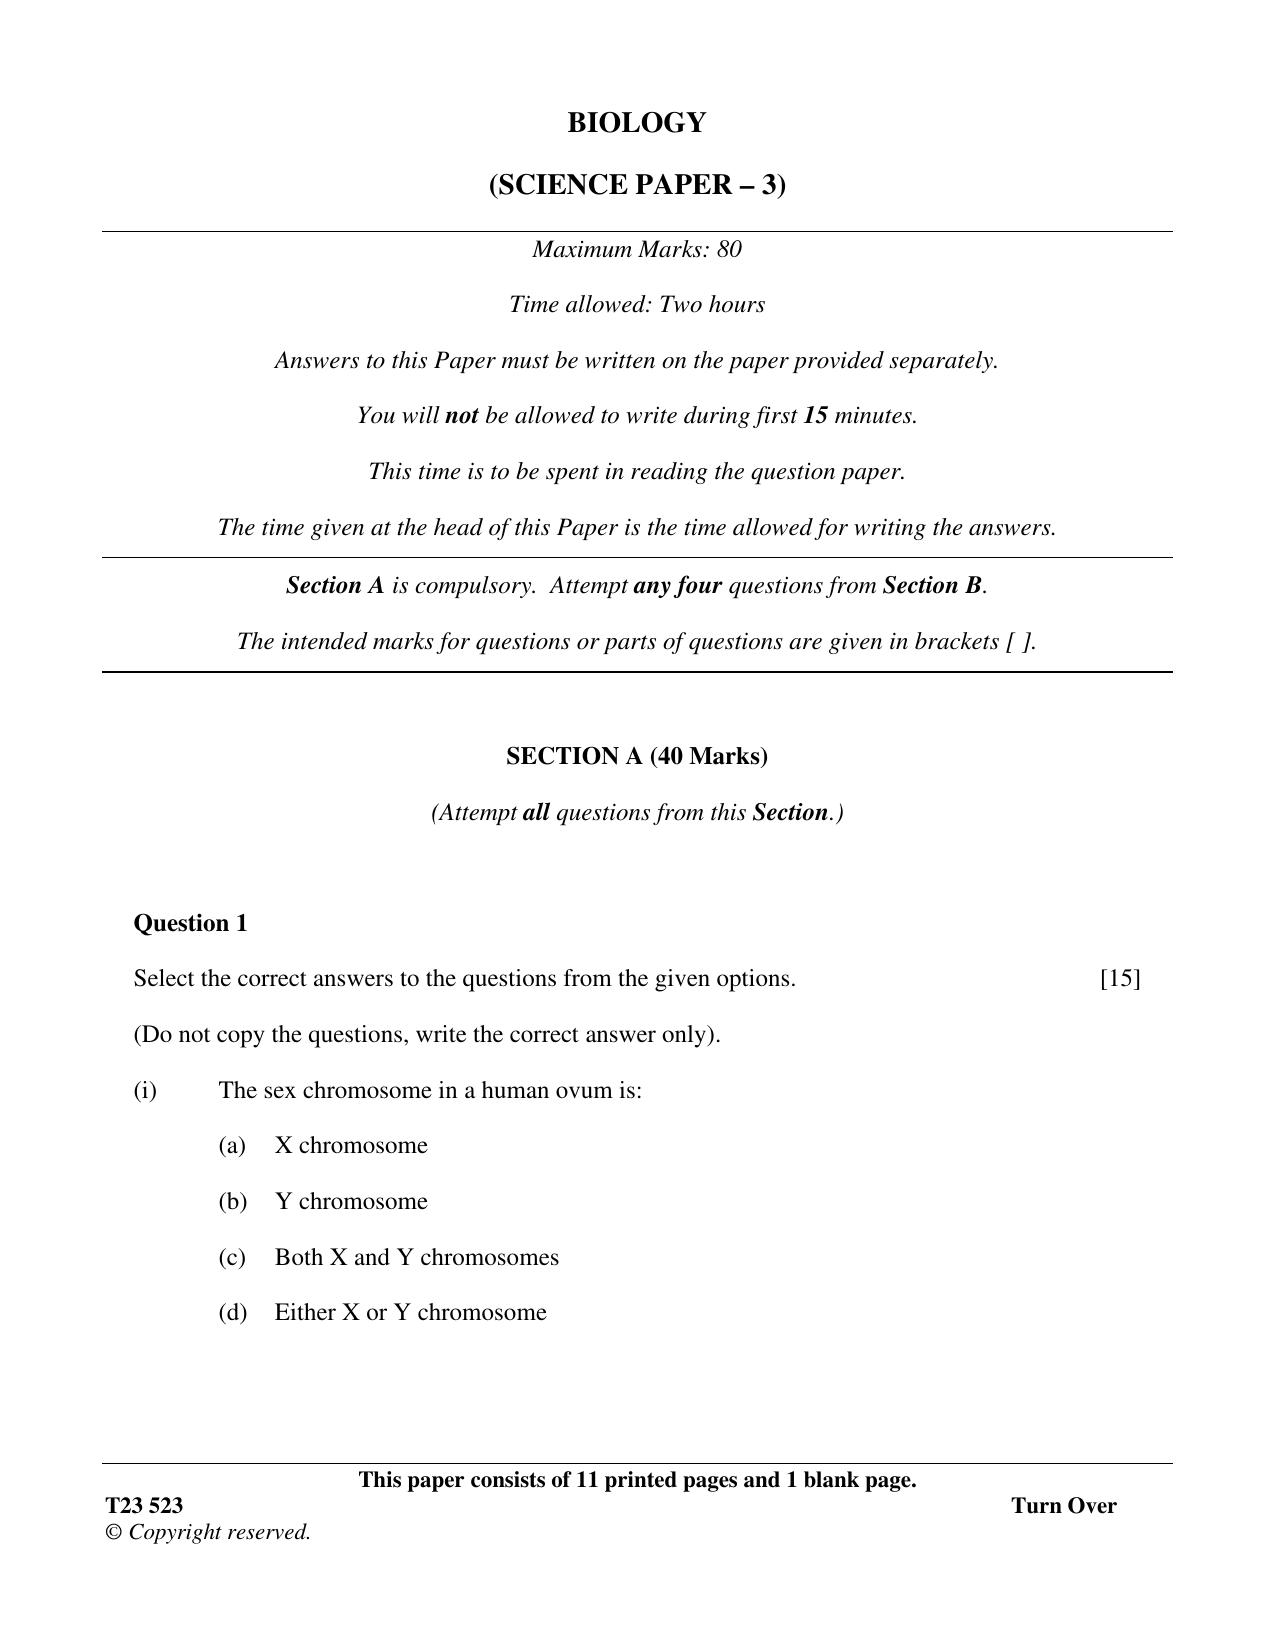 ICSE Class 10 BIOLOGY (SCIENCE PAPER 3) 2023 Question Paper - Page 1